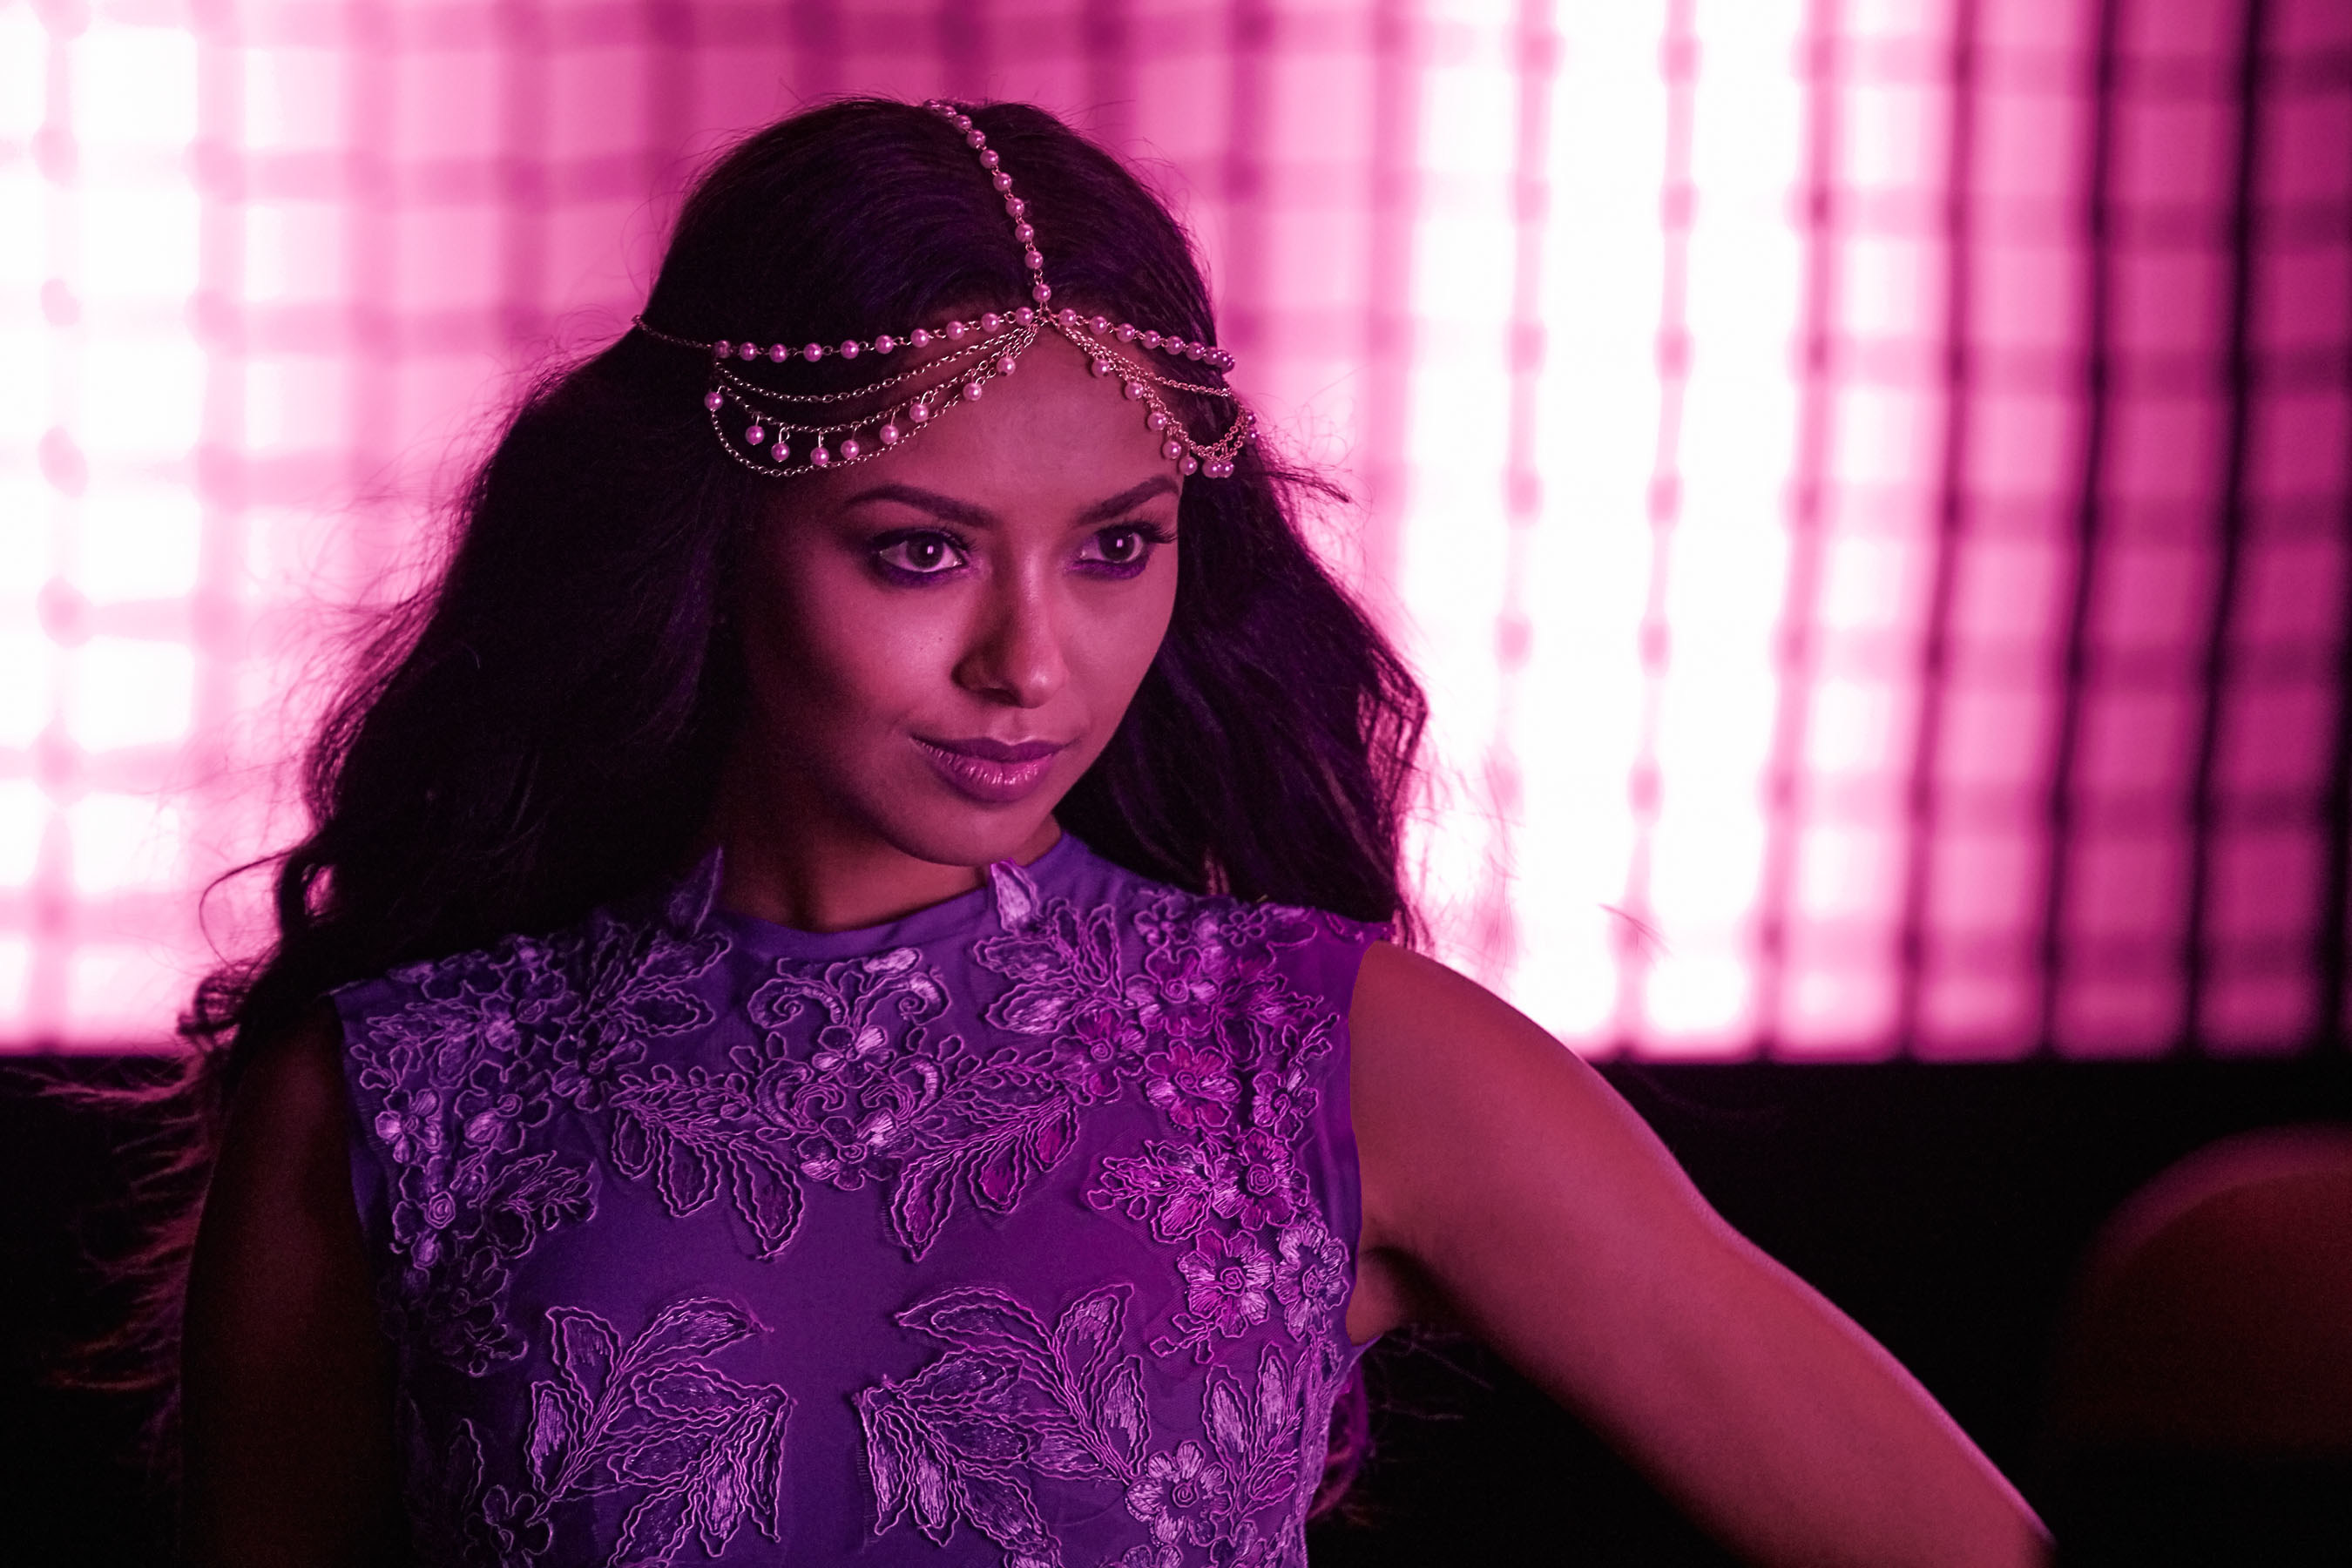 Body Wash Brand Caress(R) & Ambassador Kat Graham Bring Touch-Activated Fine Fragrance to Life in New Campaign That's Fit for a Queen